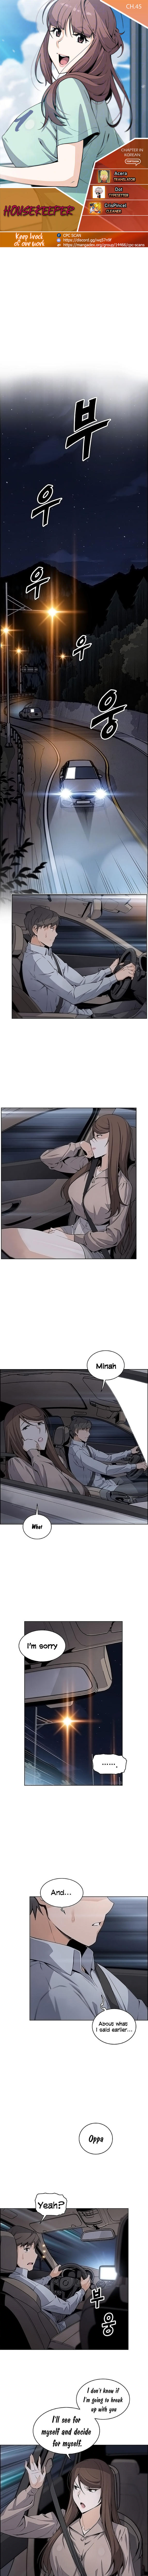 Housekeeper Manhwa - Chapter 45 Page 1